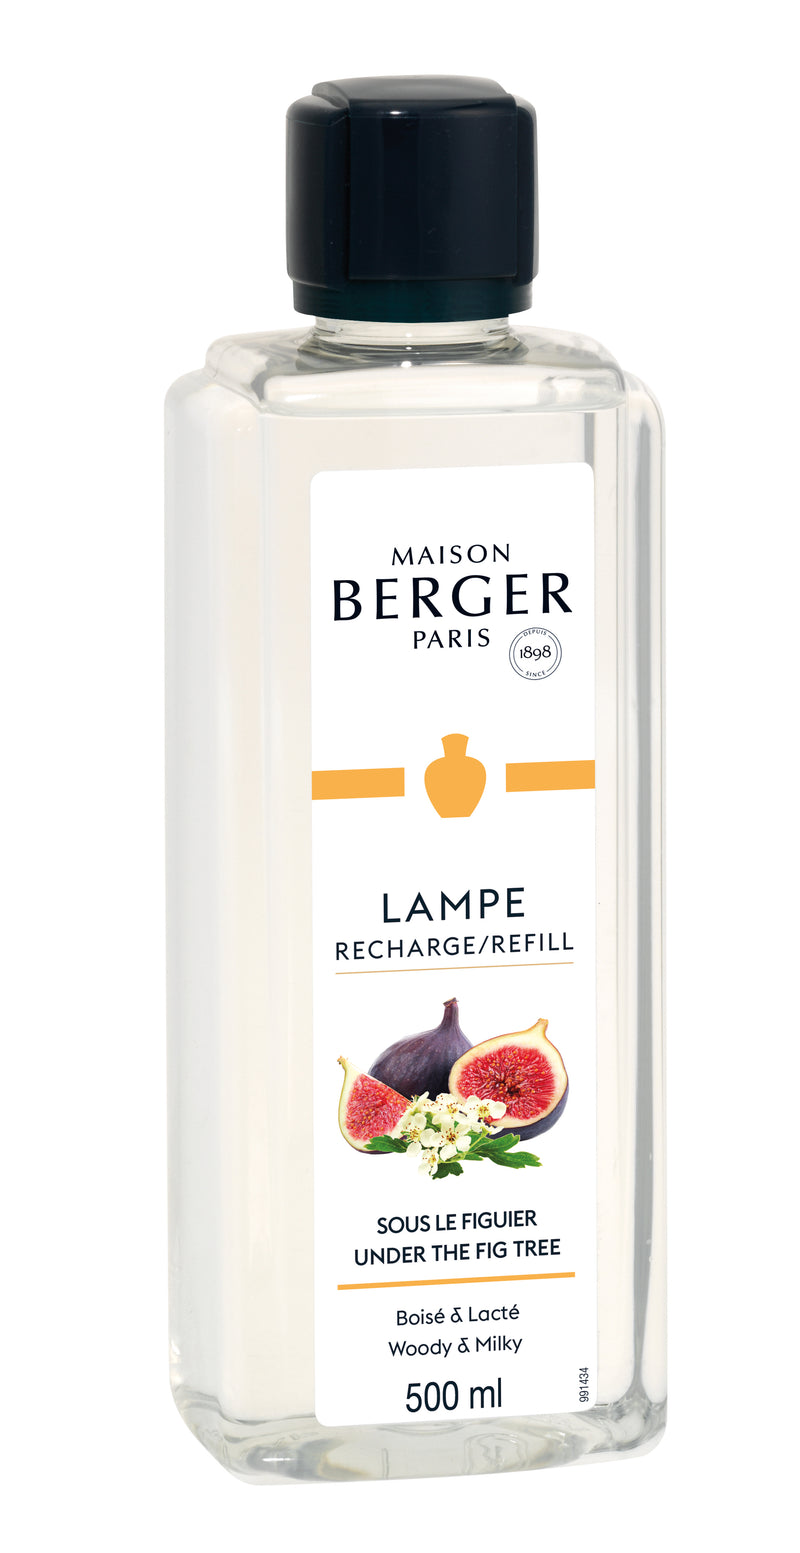 Lampe Berger huisparfum 500 ml - Under the Fig Tree / Sous le Figuer